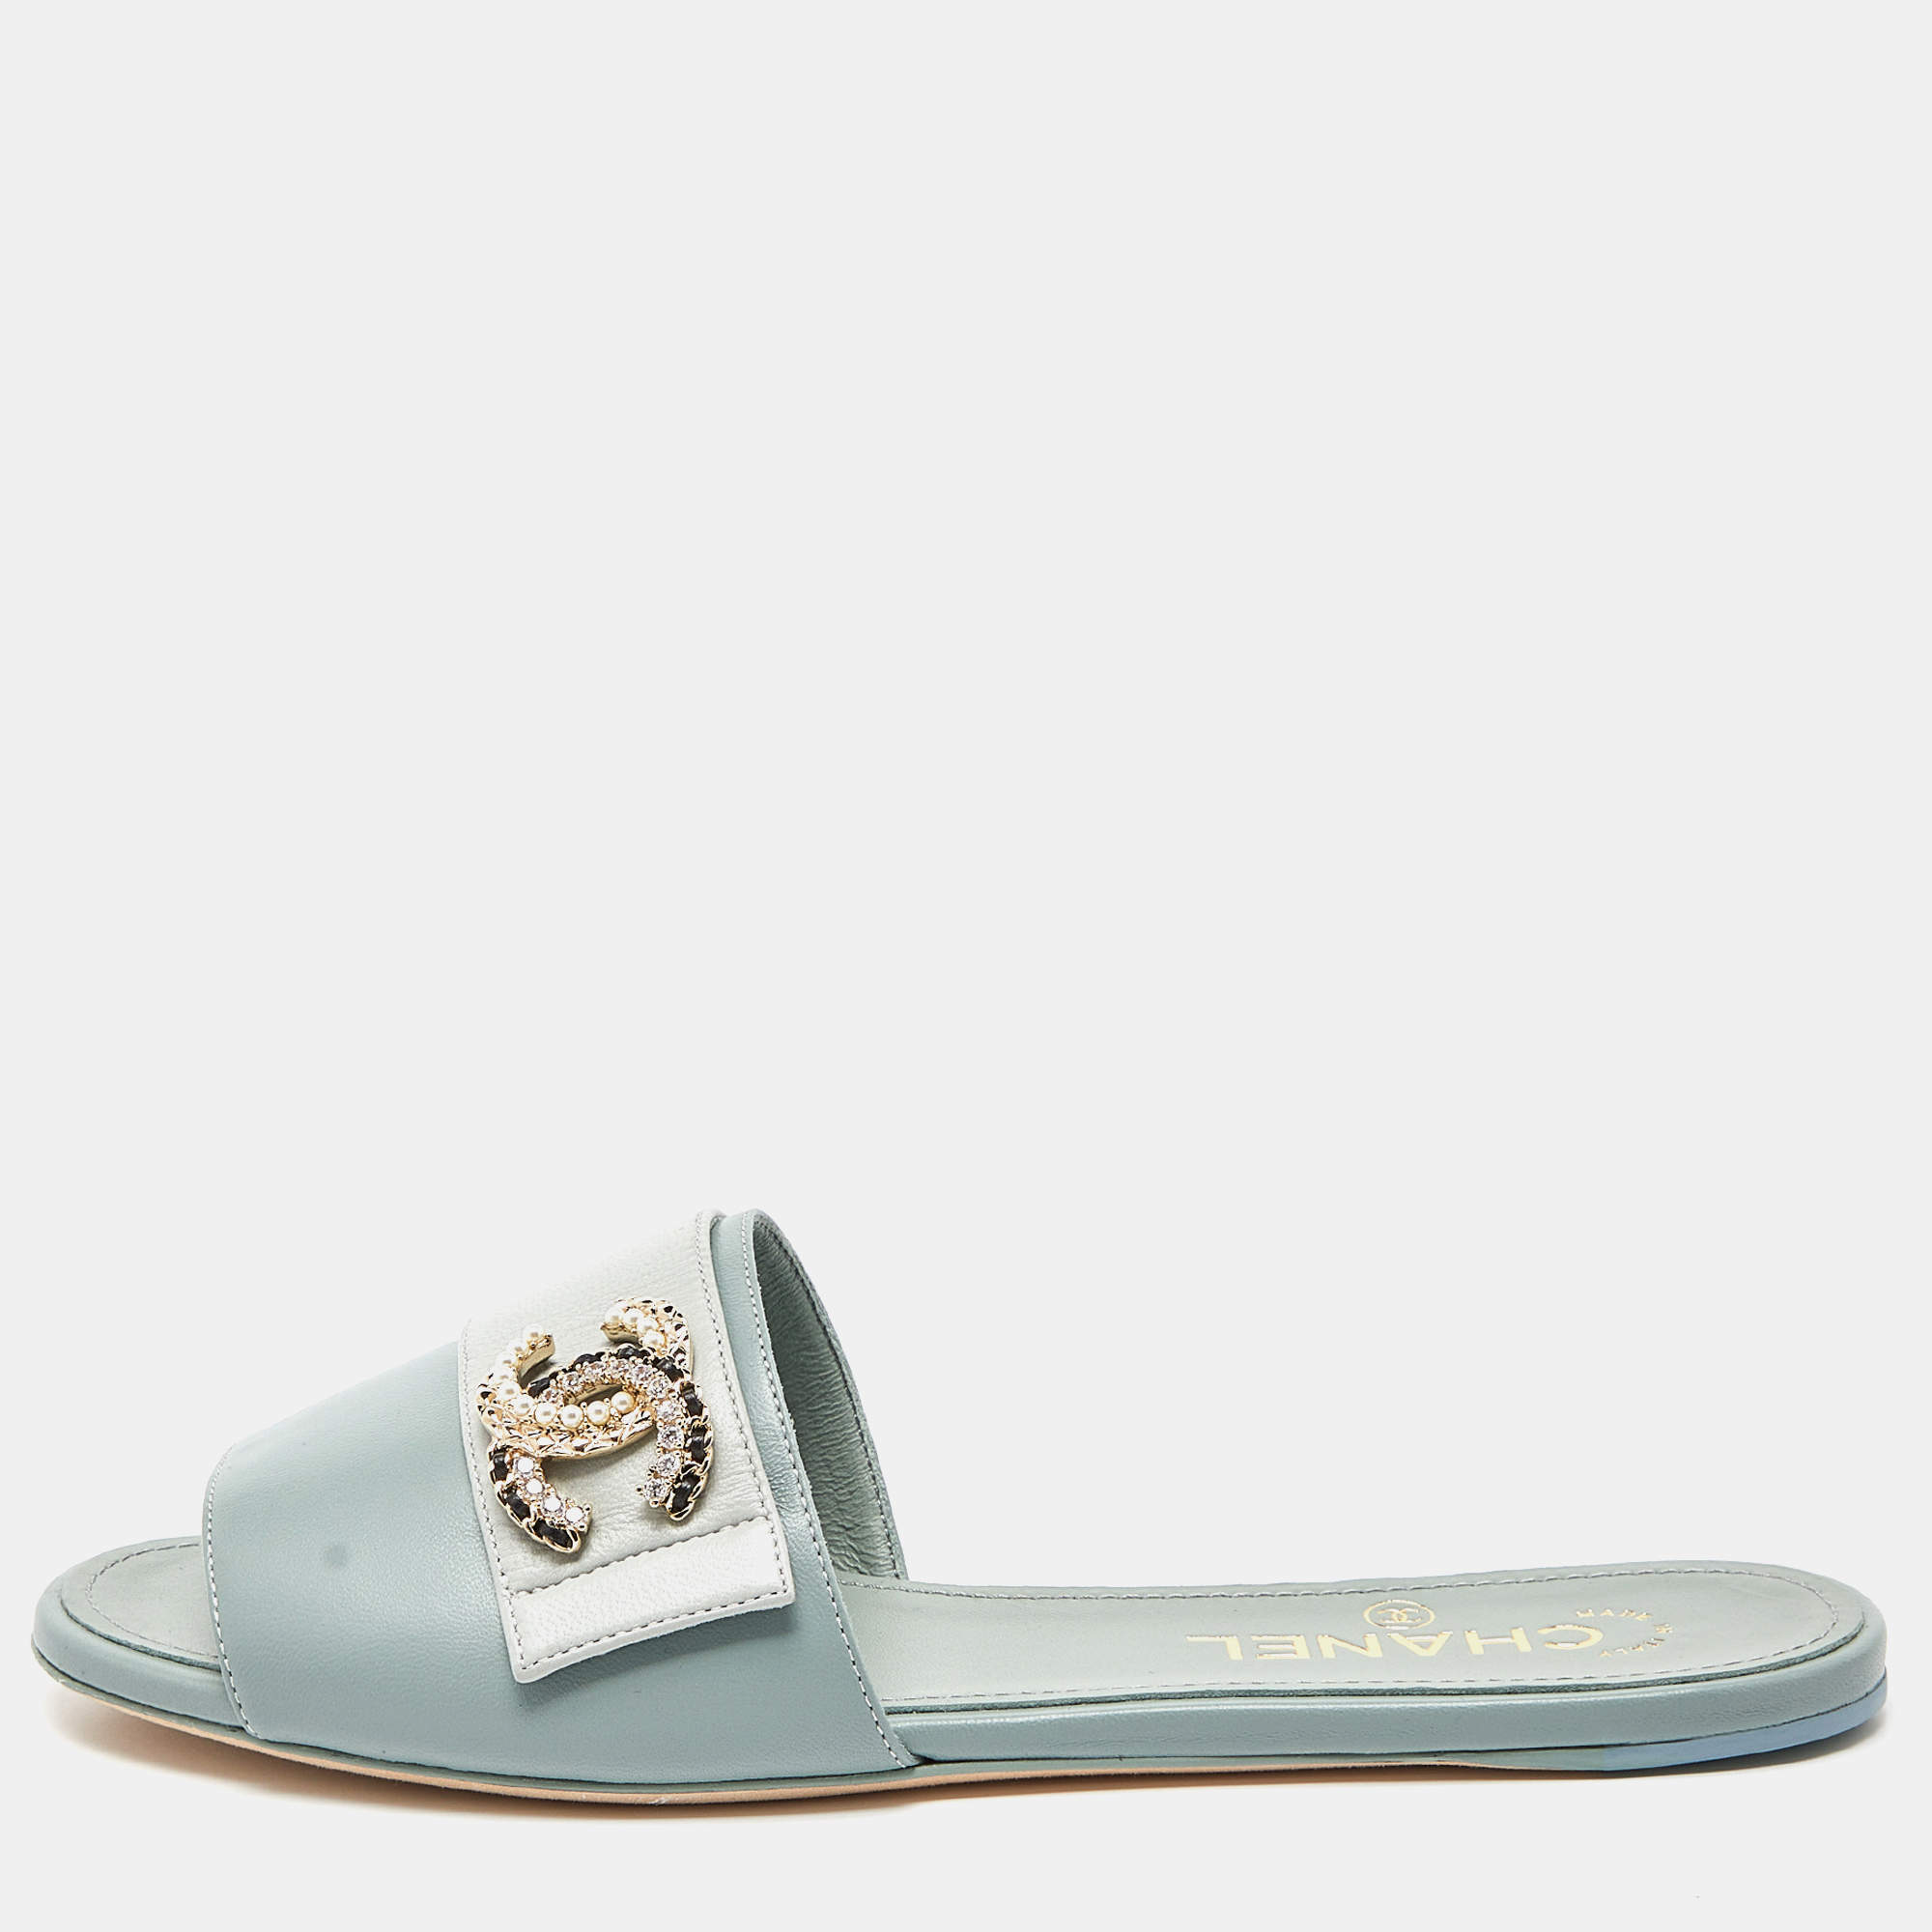 Chanel Pale Green Leather Crystal/Pearl Embellished CC Logo Flat